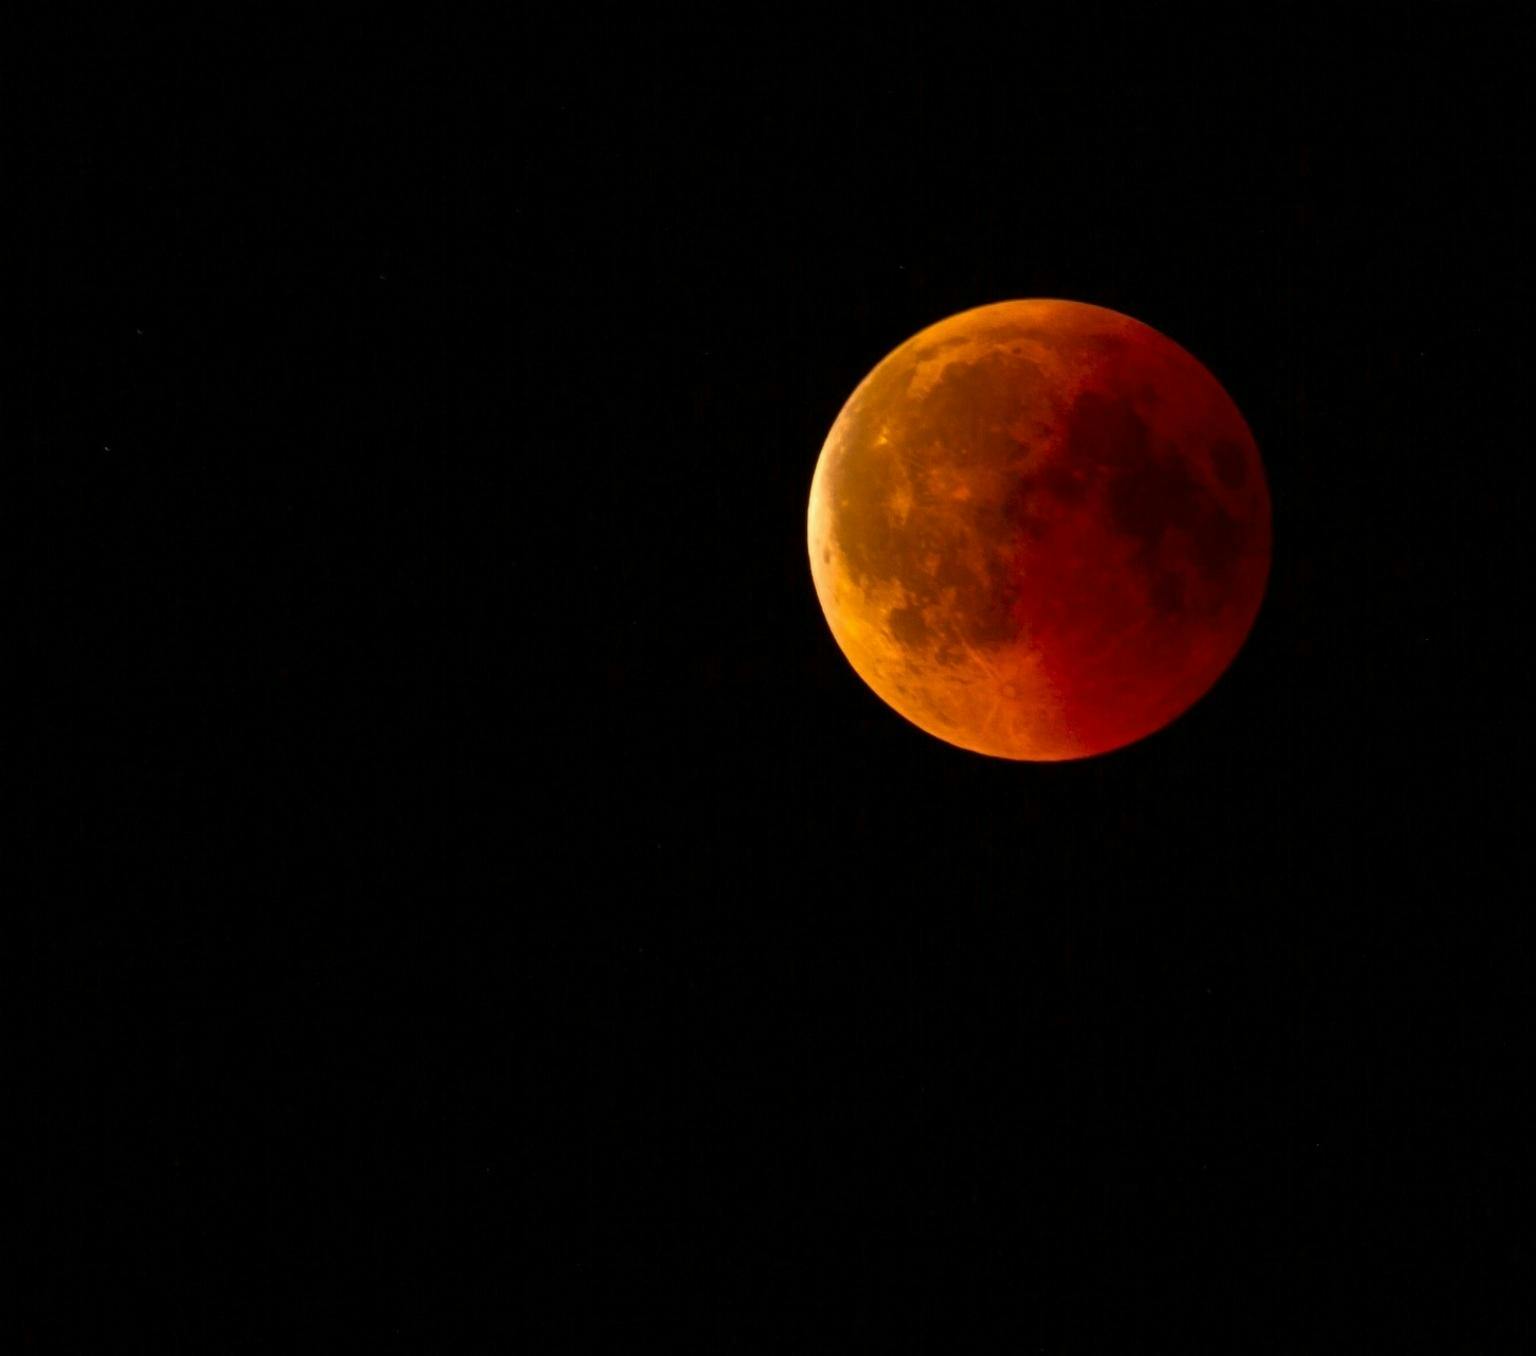 A moon in a red and brownish colour, against a black sky